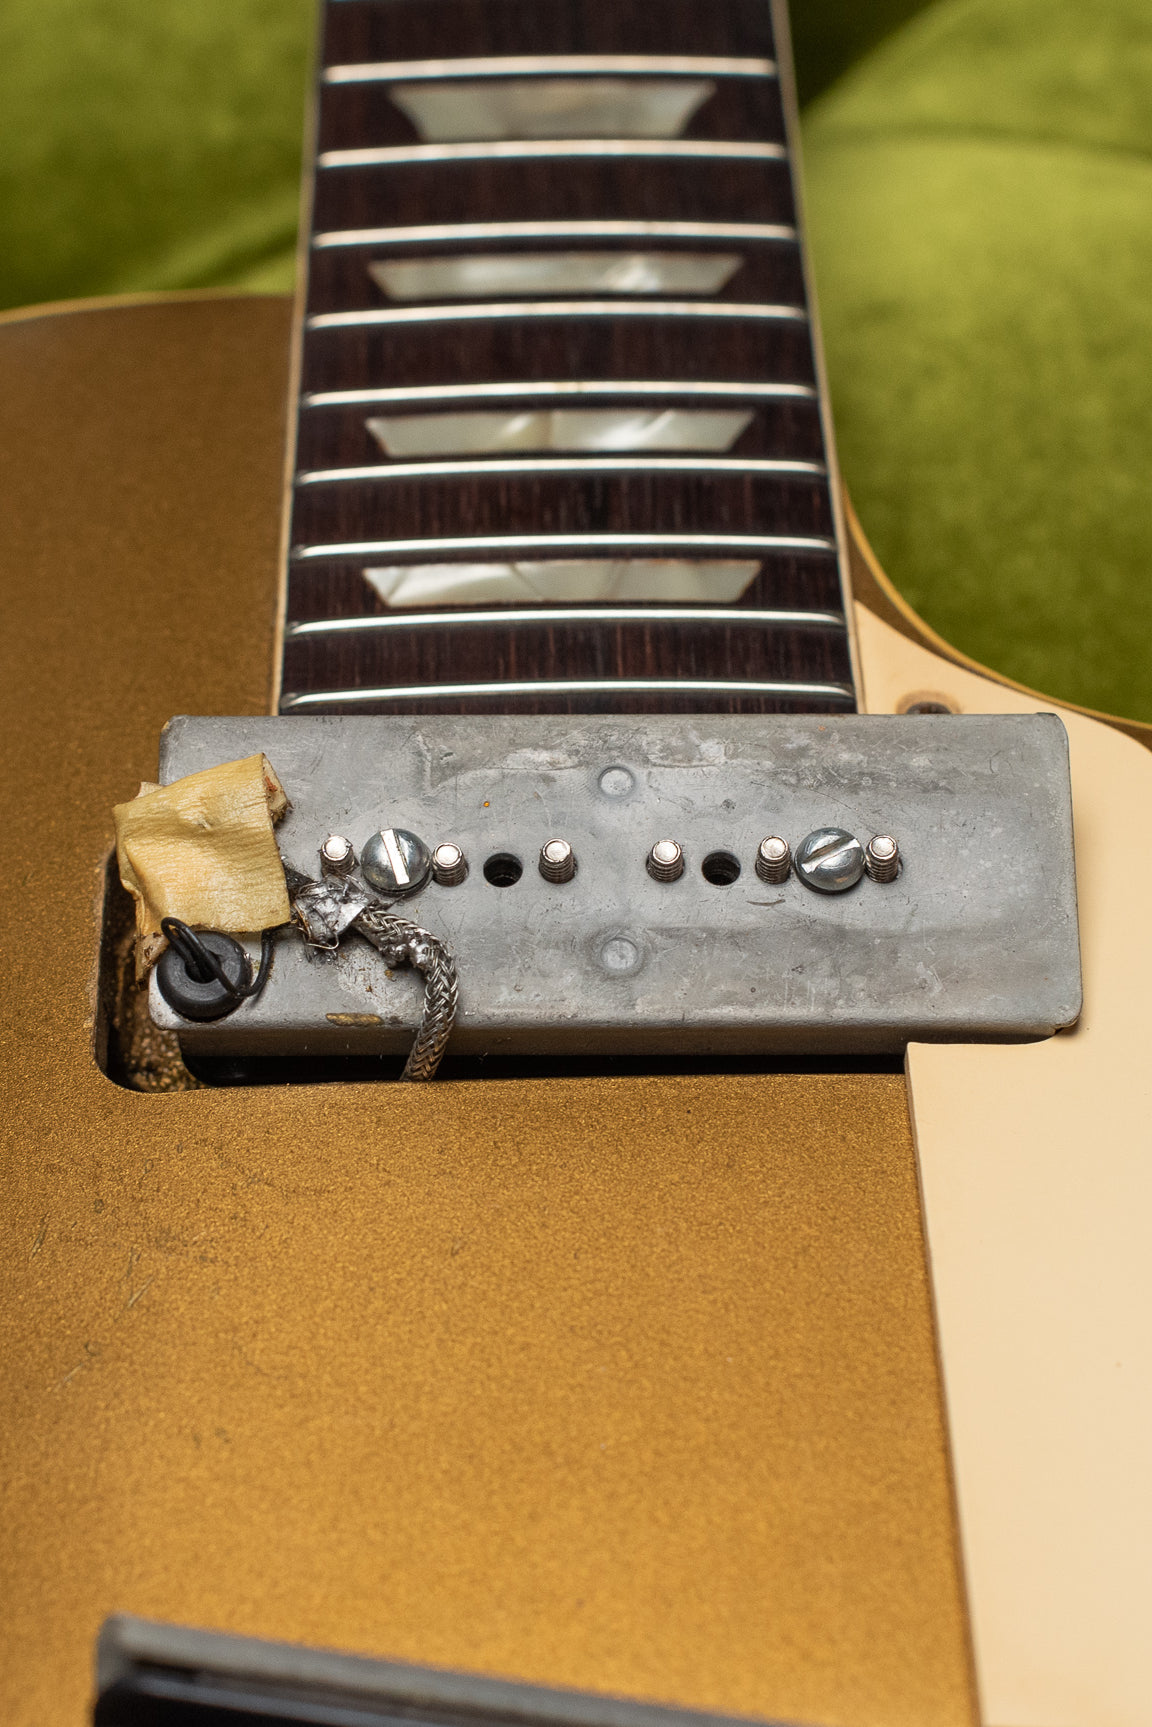 1950s Gibson P-90 pickup base plate